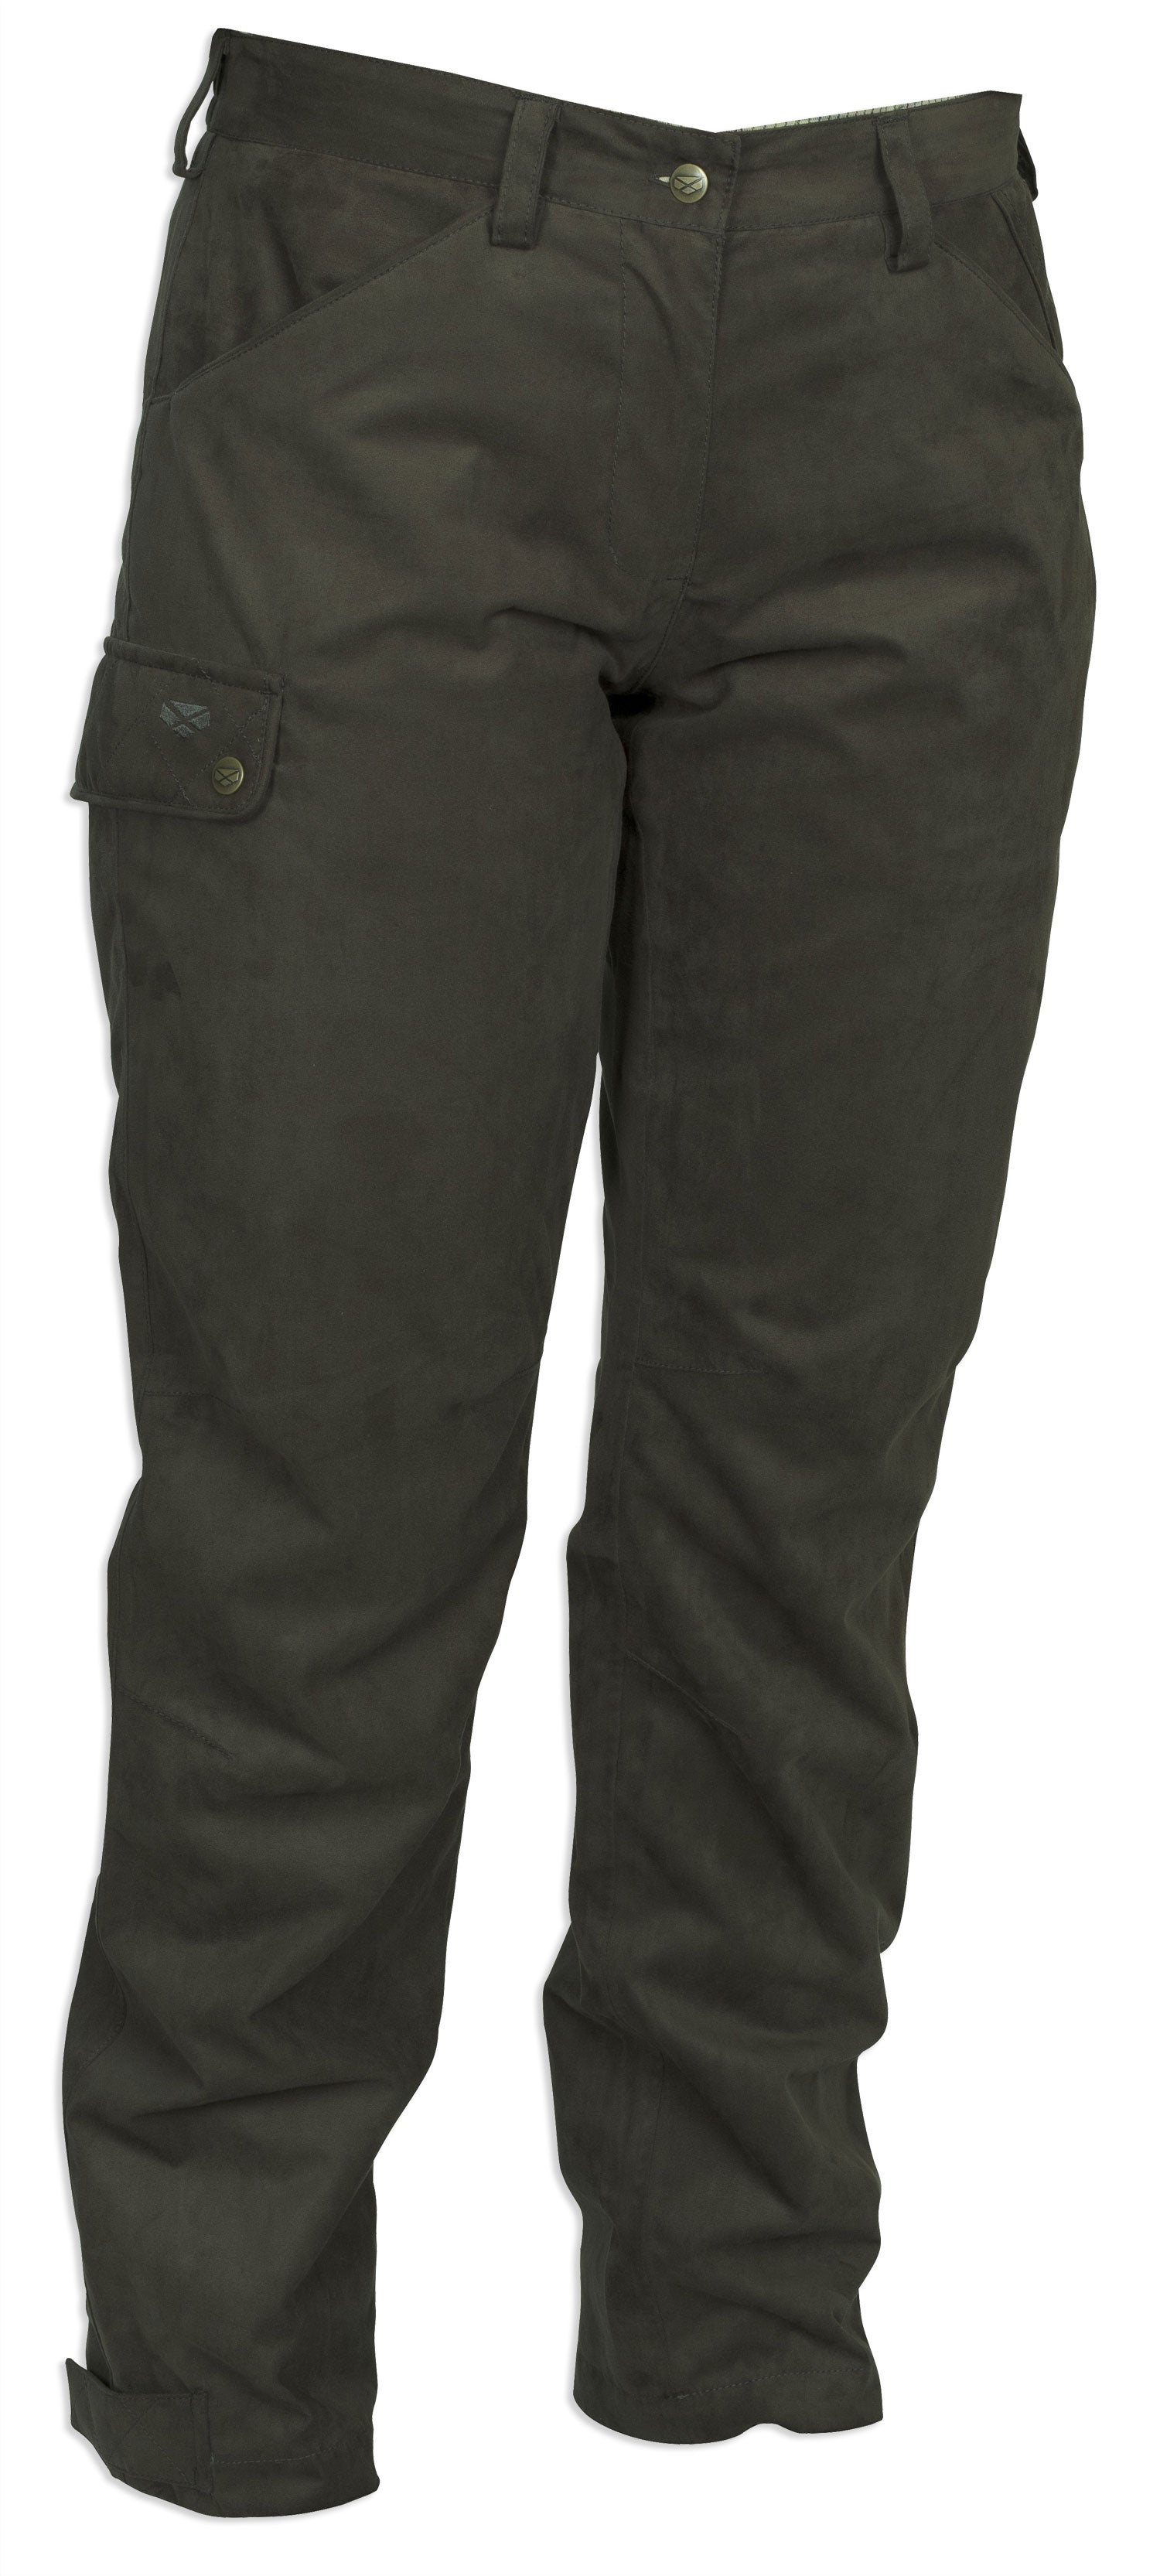 Seeland Woodcock Lady Trousers  Ladies Country Trousers  Breeks  Women   Best in the Country